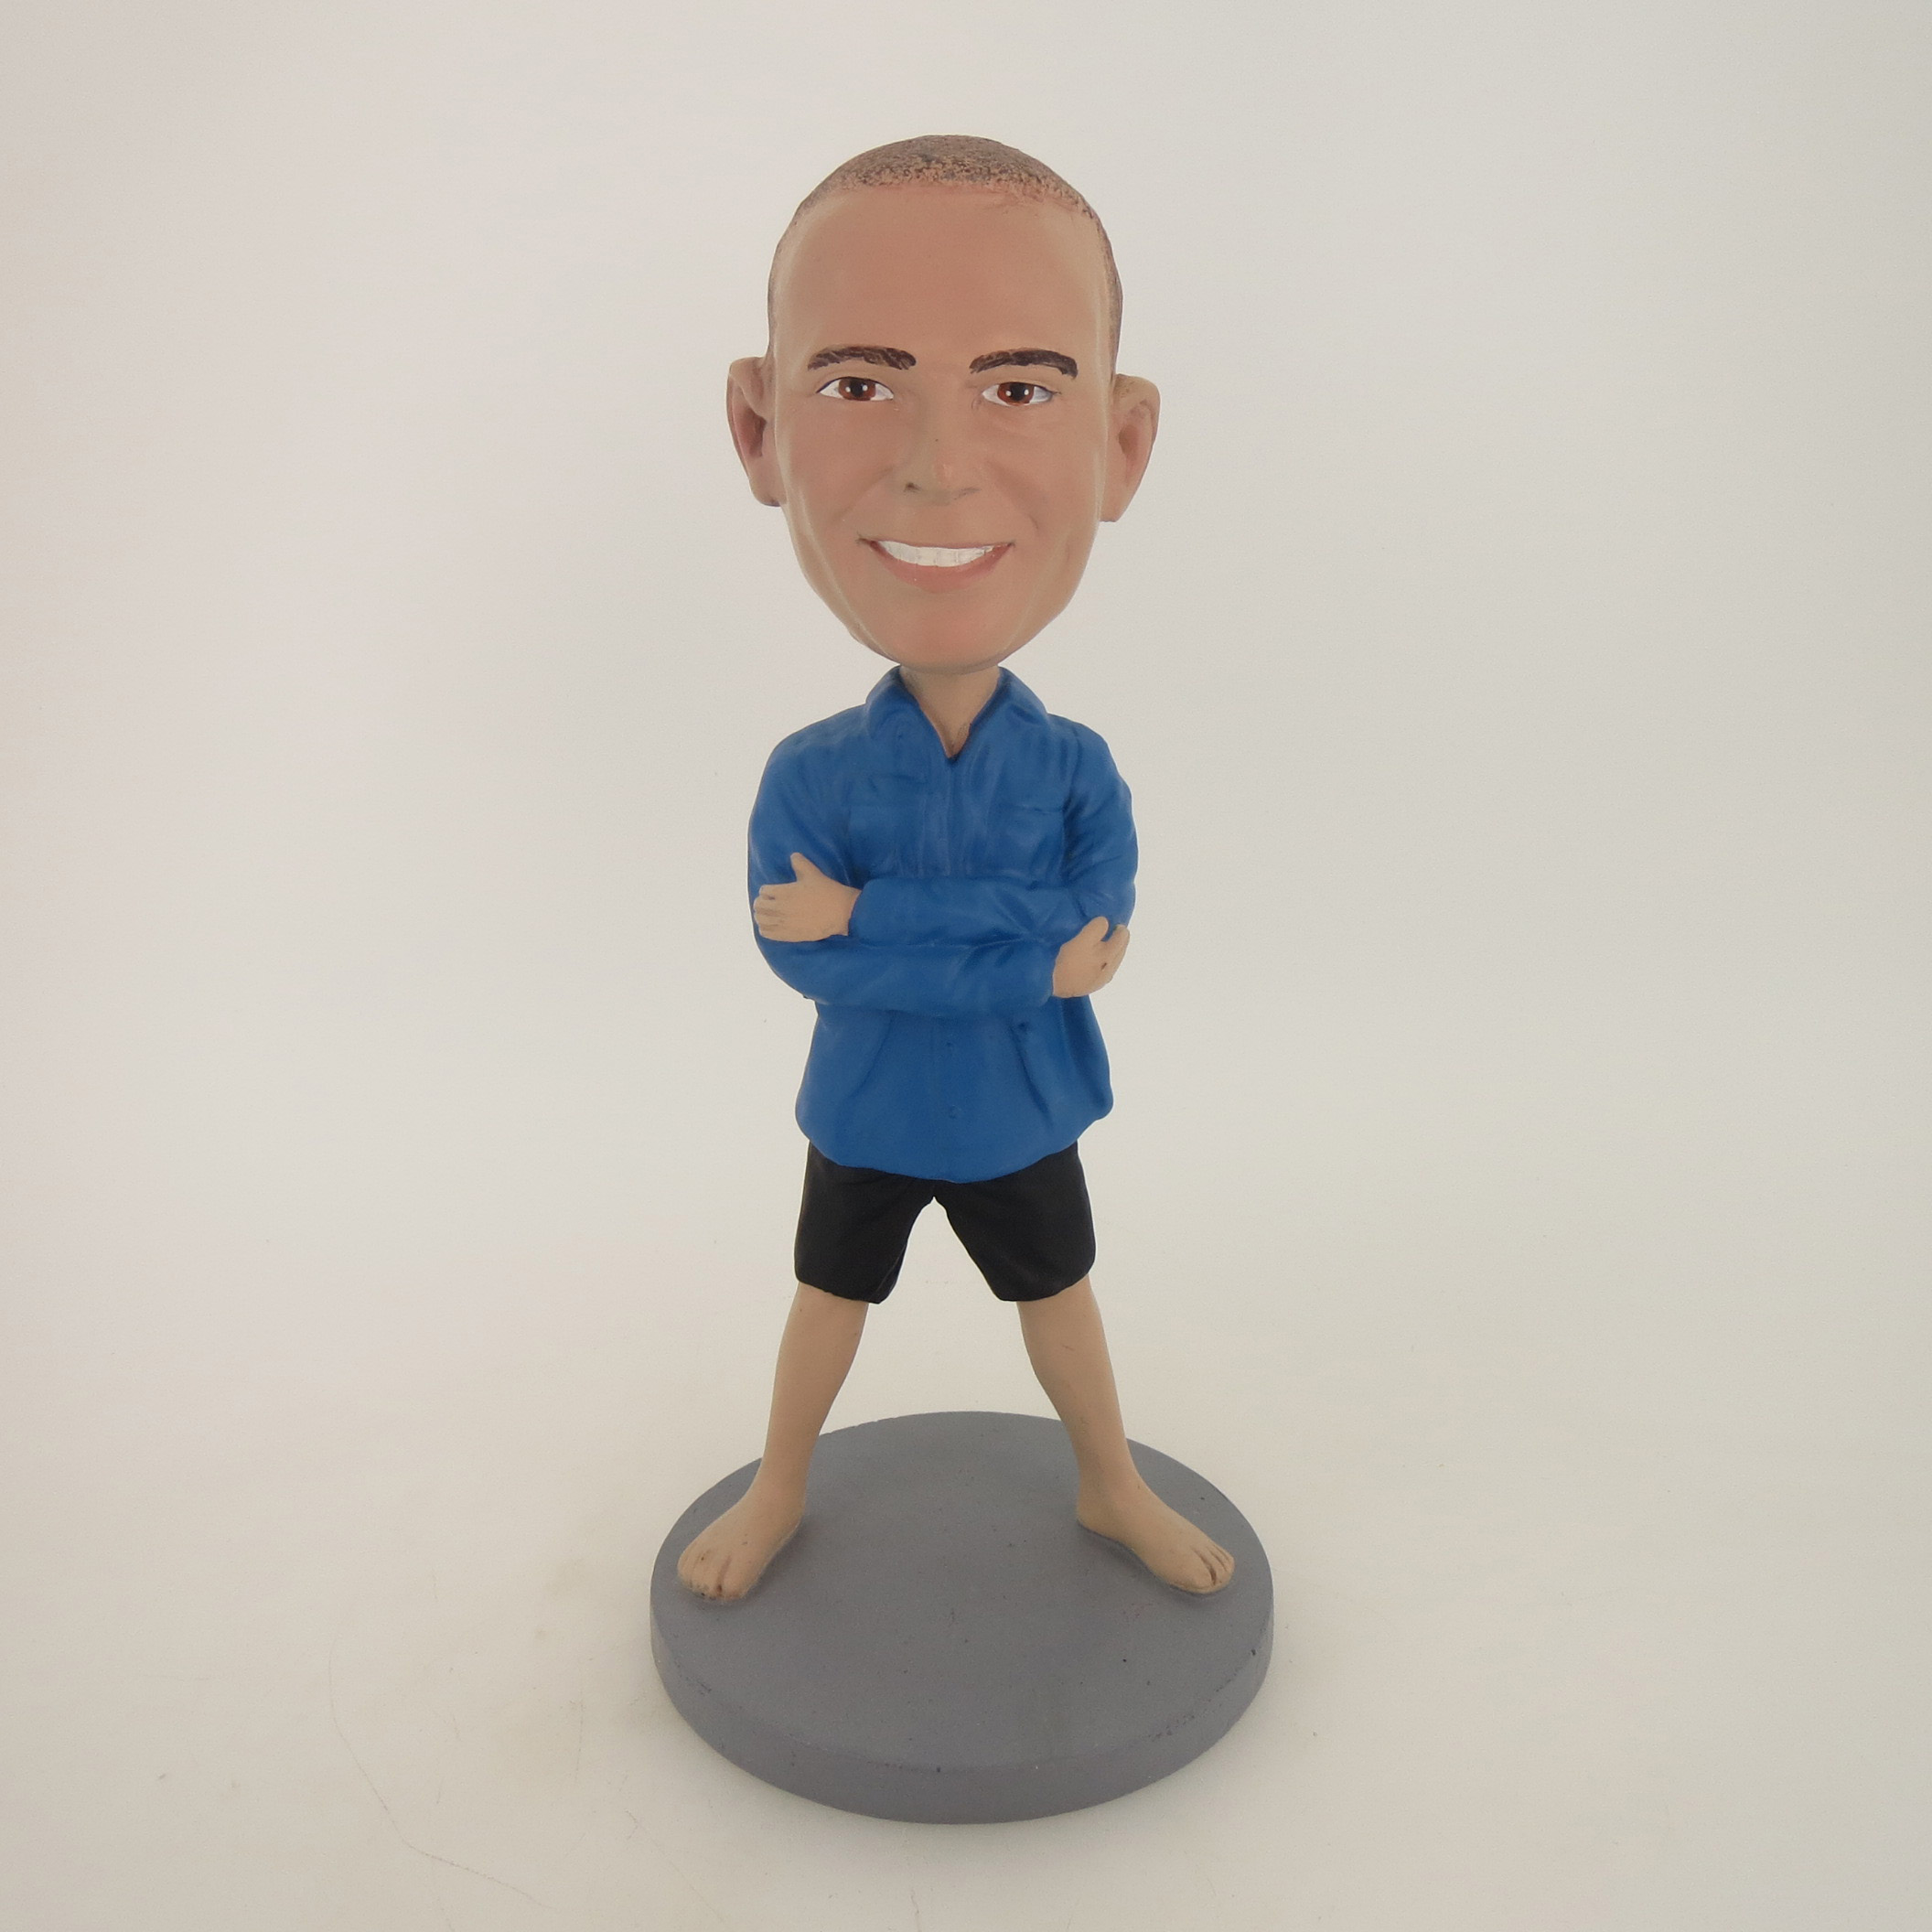 Picture of Custom Bobblehead Doll: Man In Blue Excercising